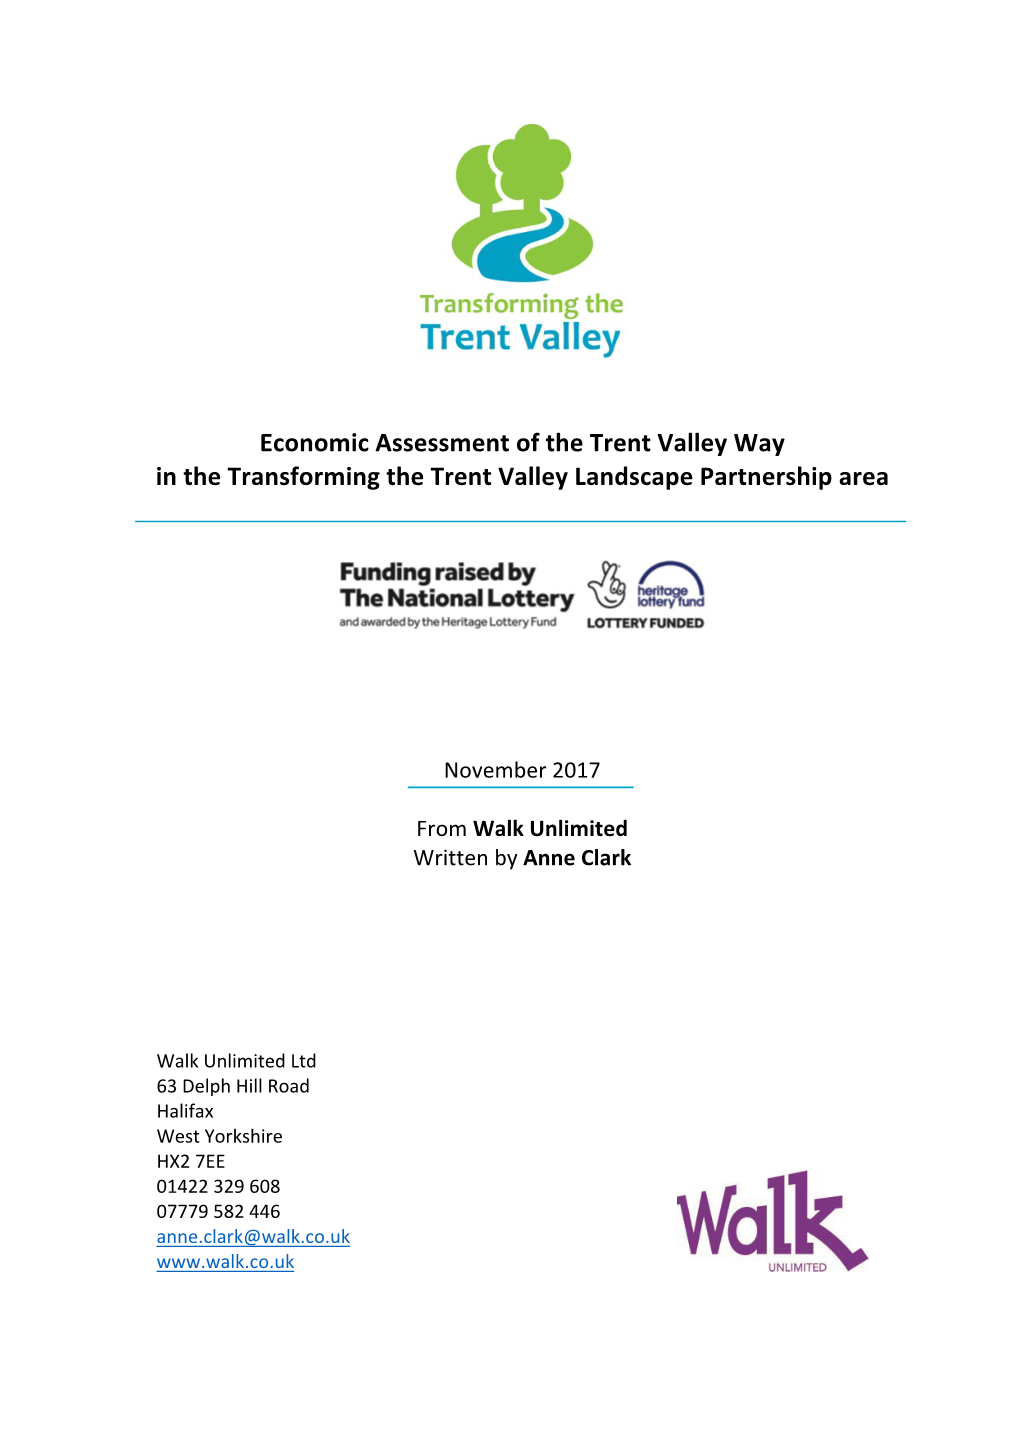 Economic Assessment of the Trent Valley Way in the Transforming the Trent Valley Landscape Partnership Area